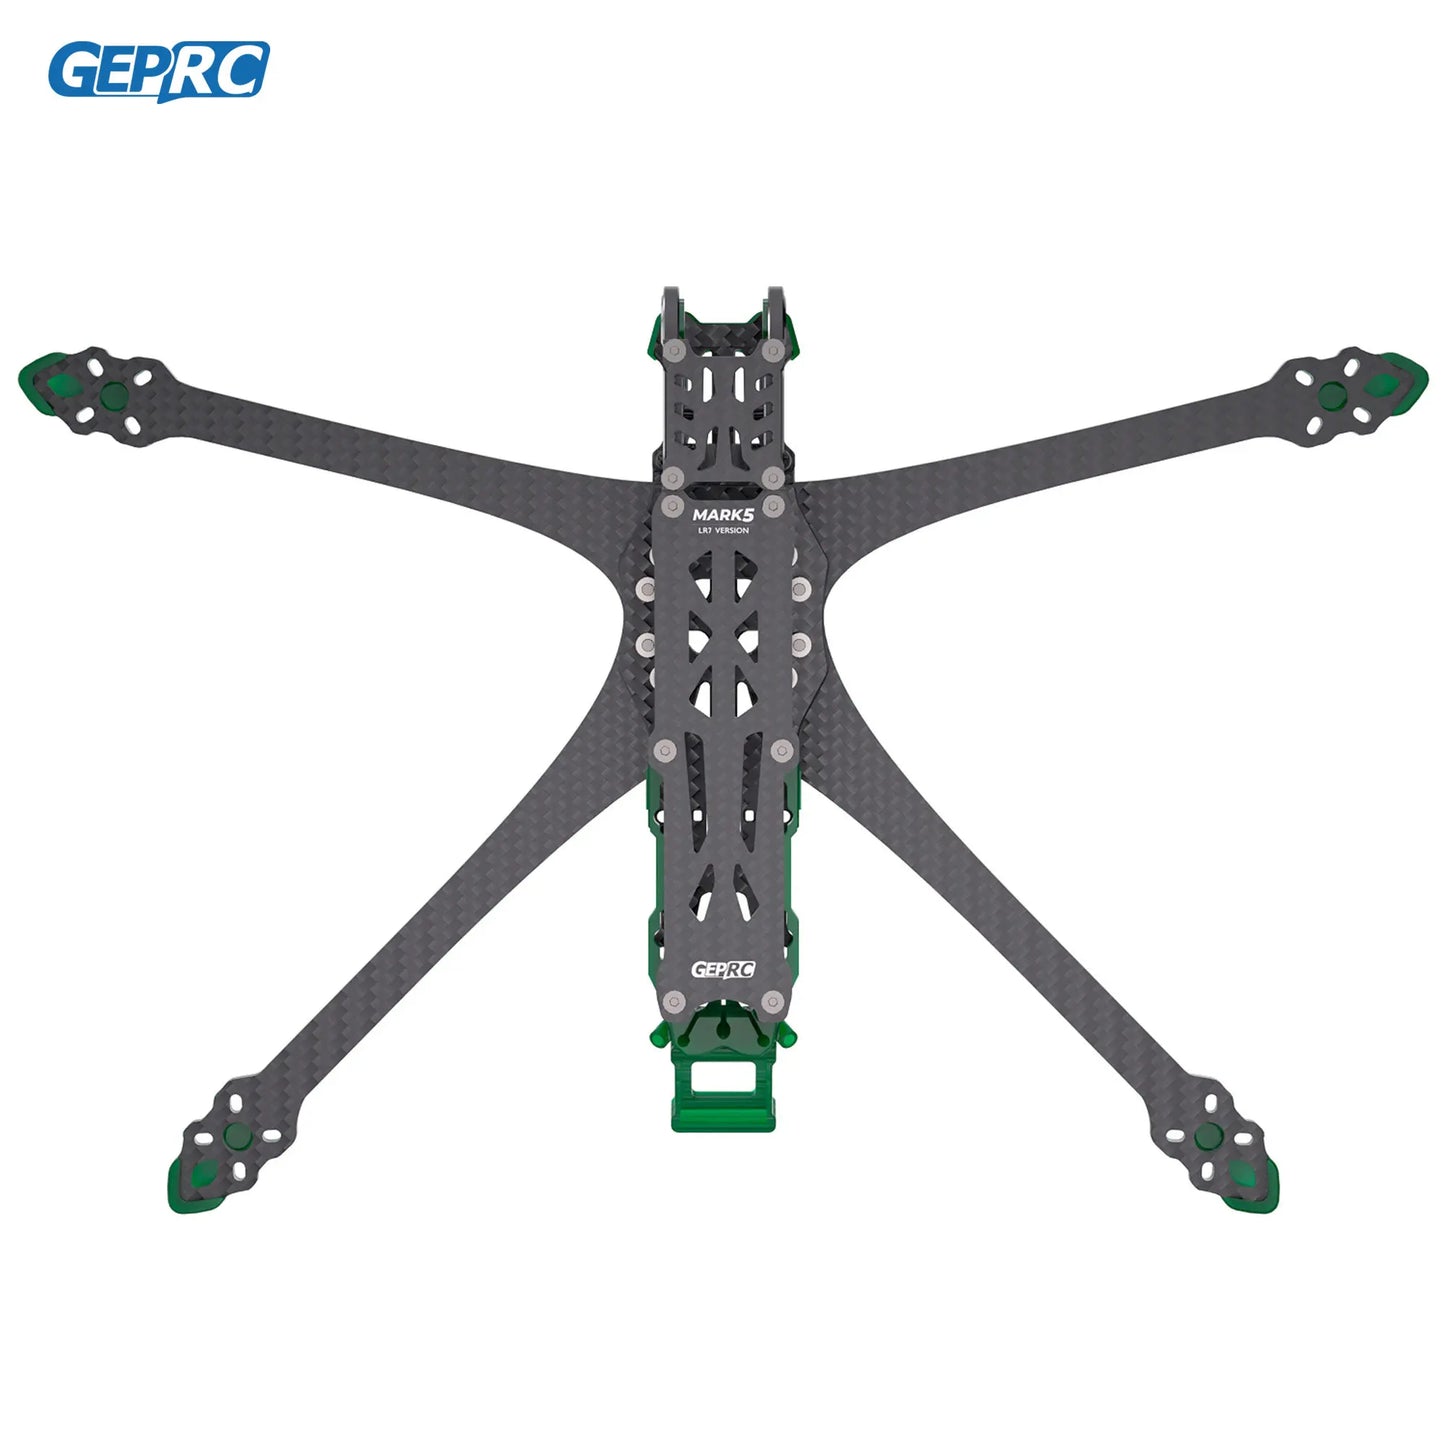 GEPRC GEP-MK5D-LR7 Frame Parts Propeller Accessory - Base Quadcopter FPV Freestyle RC Racing Drone 7-inch